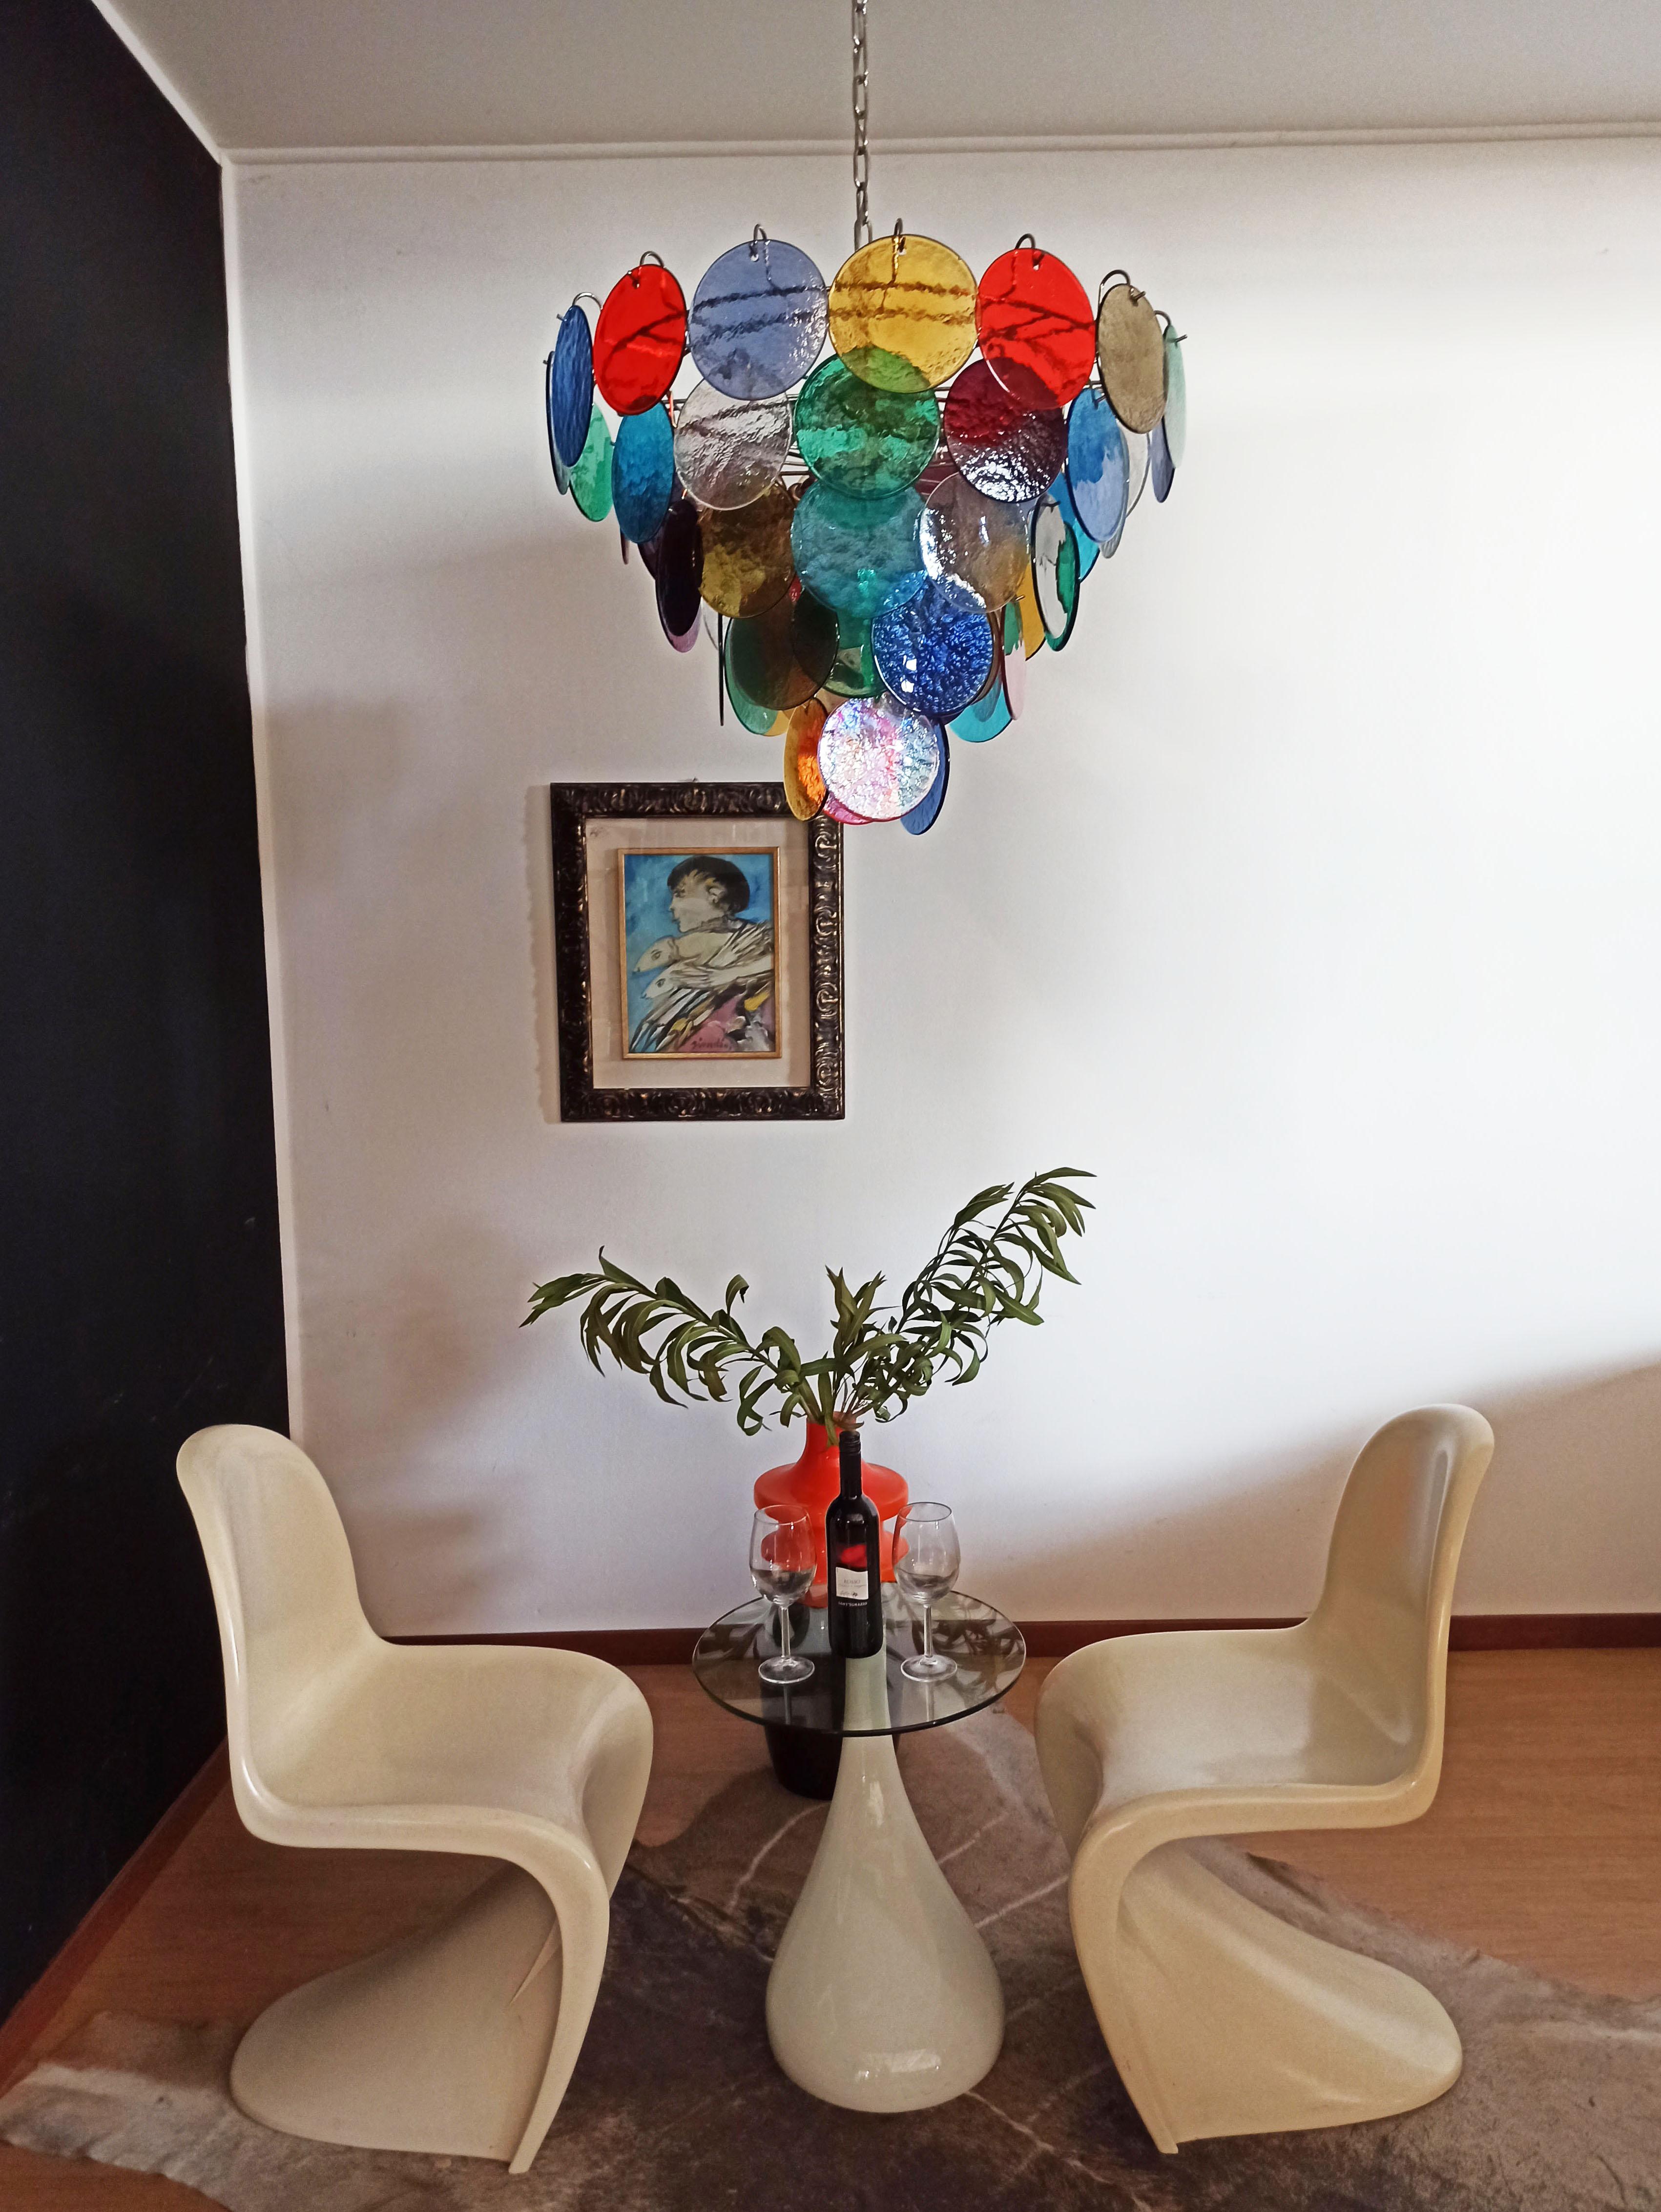 Italian Murano chandelier. The chandelier has 57 Murano multicolored glass disks. Nickel metal frame.
Period: 1980'S
Dimensions: 48.80 inches (126 cm) height with chain, 25.60 inches (65 cm) height without chain, about 27.50 inches (70 cm)